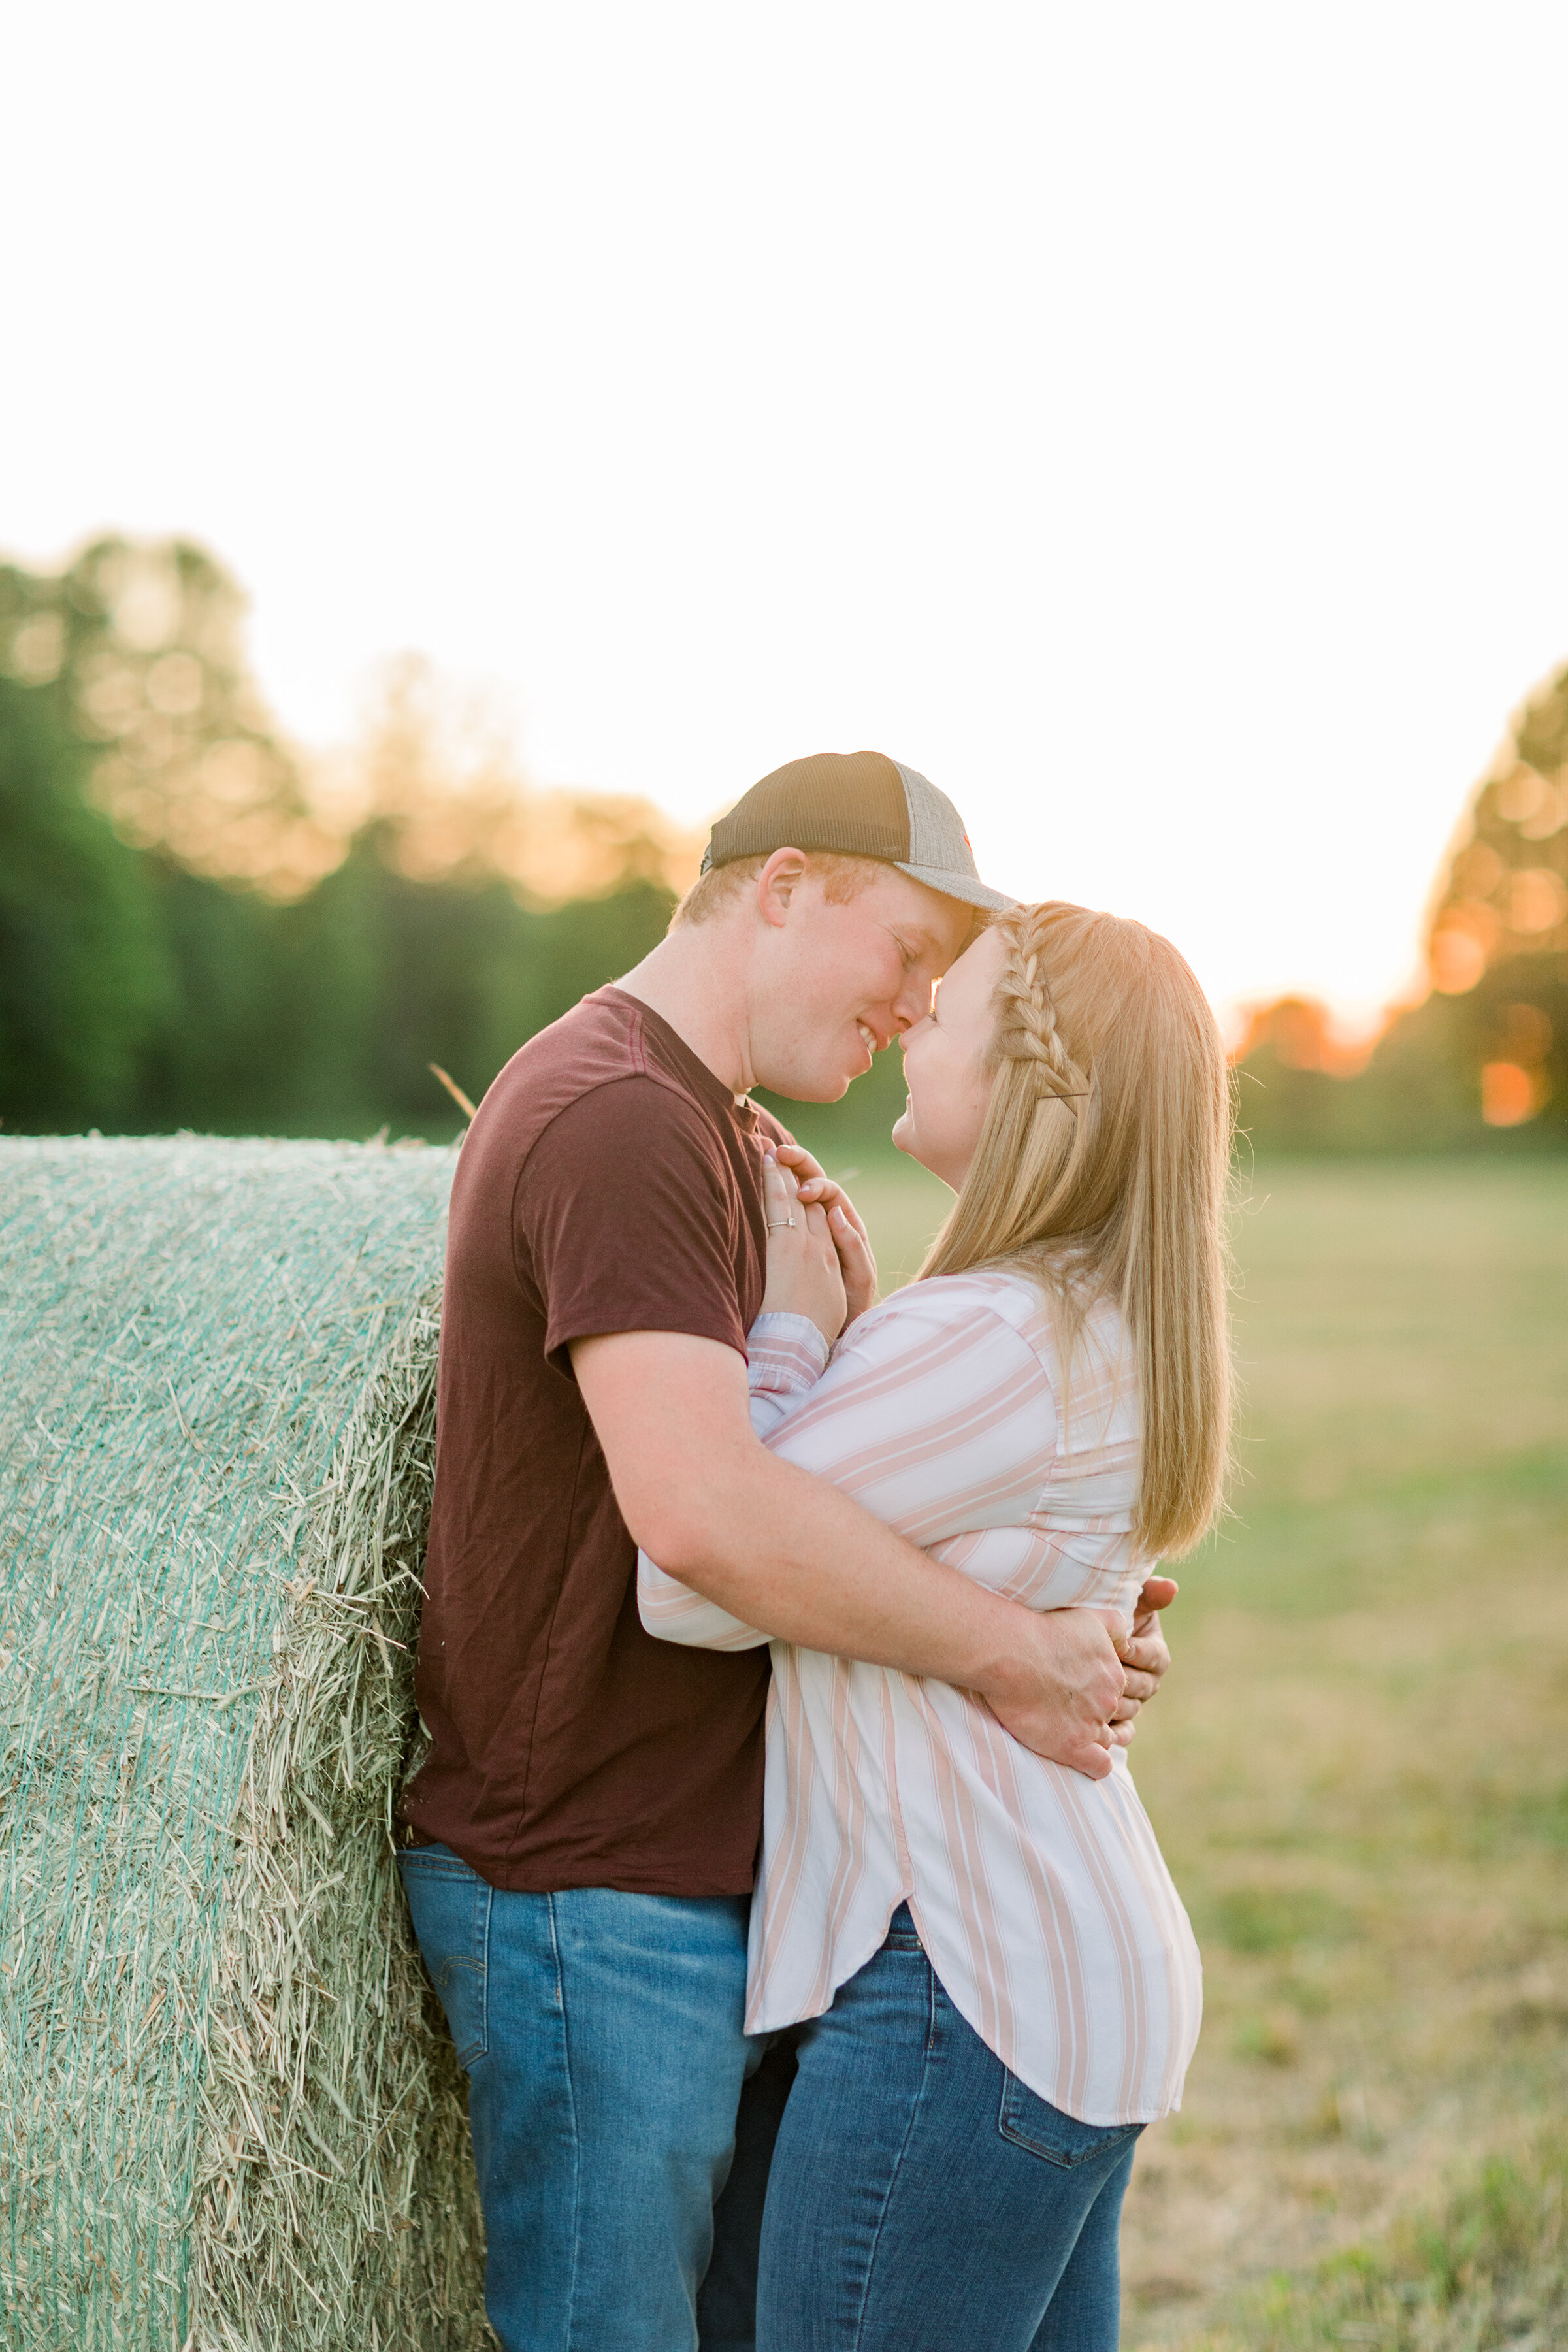  The groom goes in for a kiss in a beautiful farm themed engagement session at golden hour. Romantic couple pose inspiration outdoor photo shoot inspiration ideas and goals Chelsea Mason Photography professional engagement photographer standing coupl